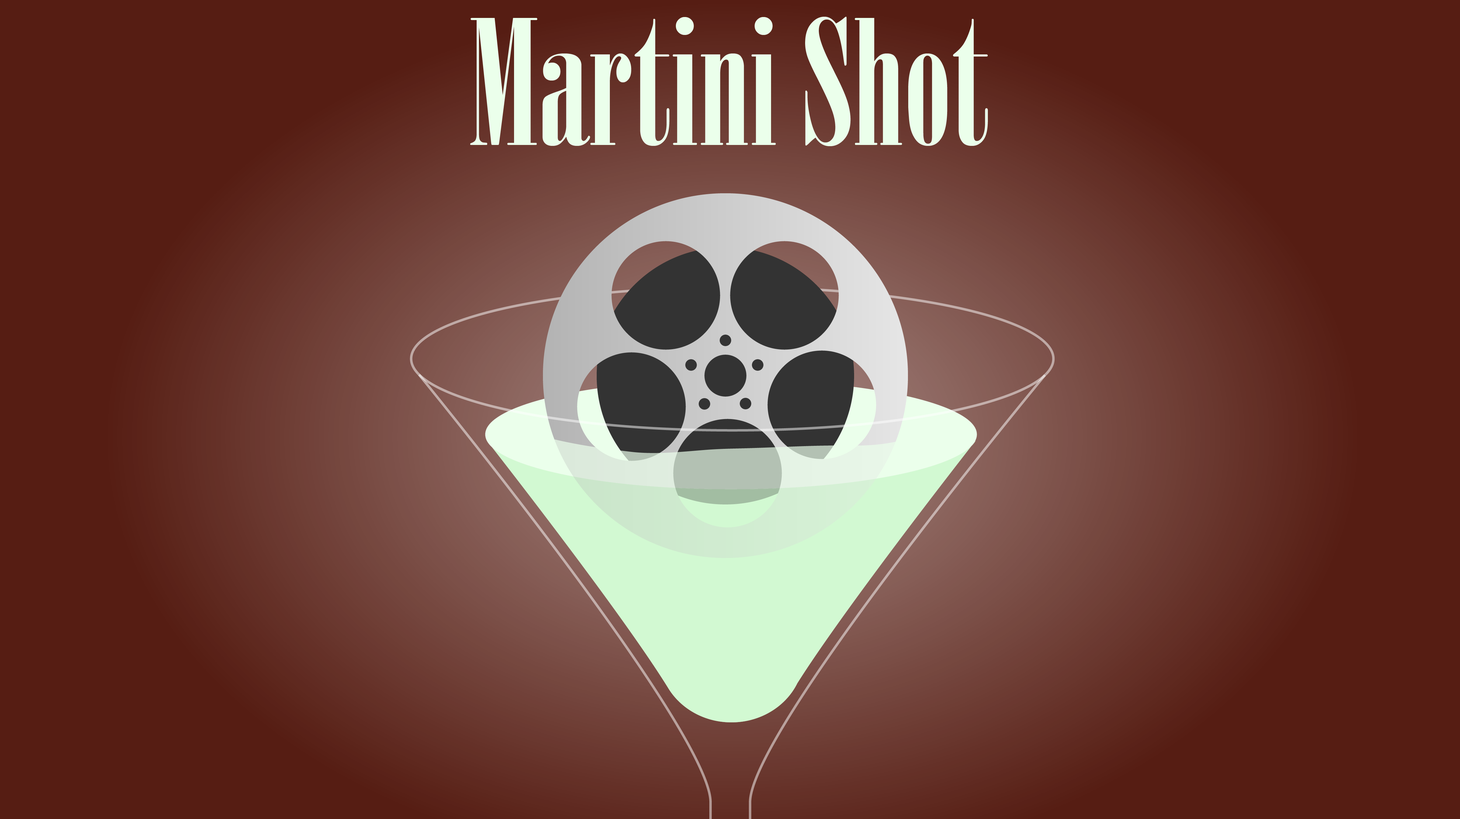 This is Rob Long and on today’s Martini Shot I talk about the true pioneers in the areas of film technology and computer graphics and making things look like other things: the plastic surgeons.